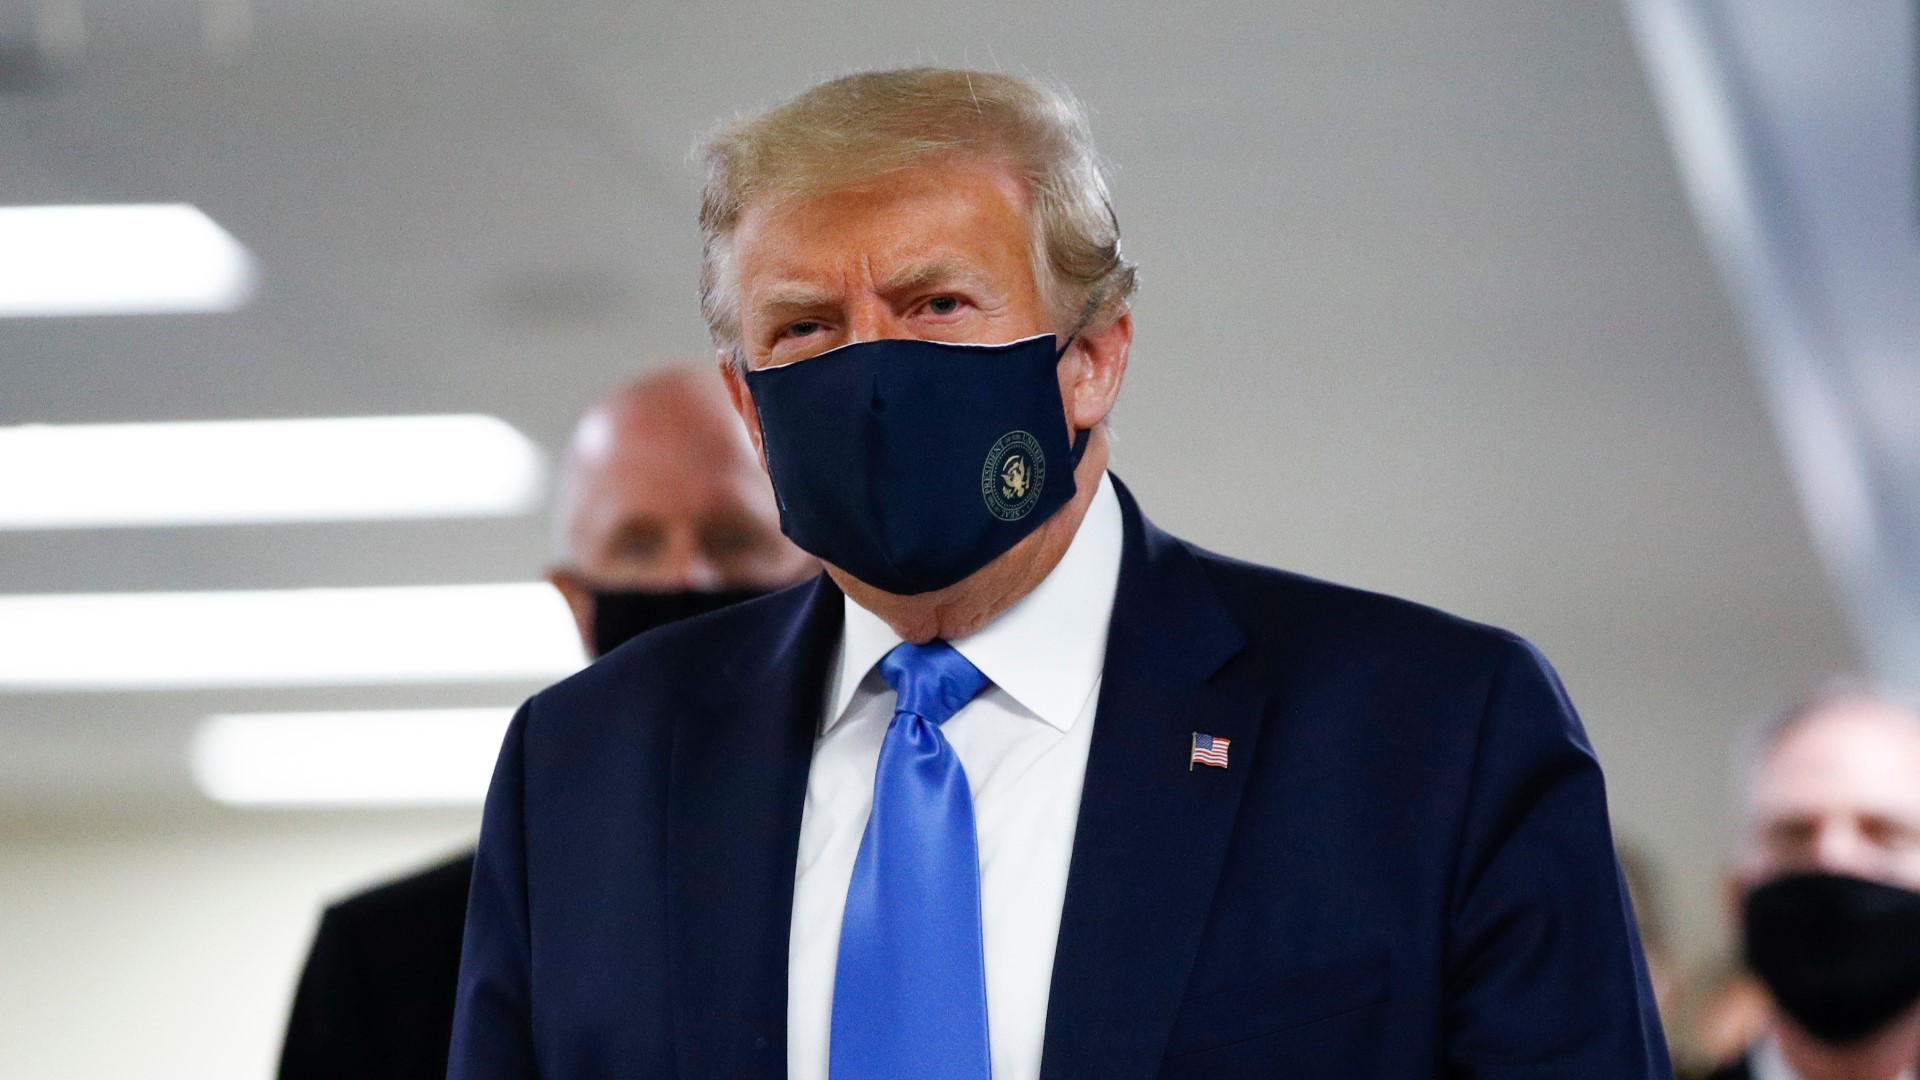 Trump had declined to wear a mask at news conferences, coronavirus task force updates, rallies and other public events prior to Saturday's visit at a hospital.